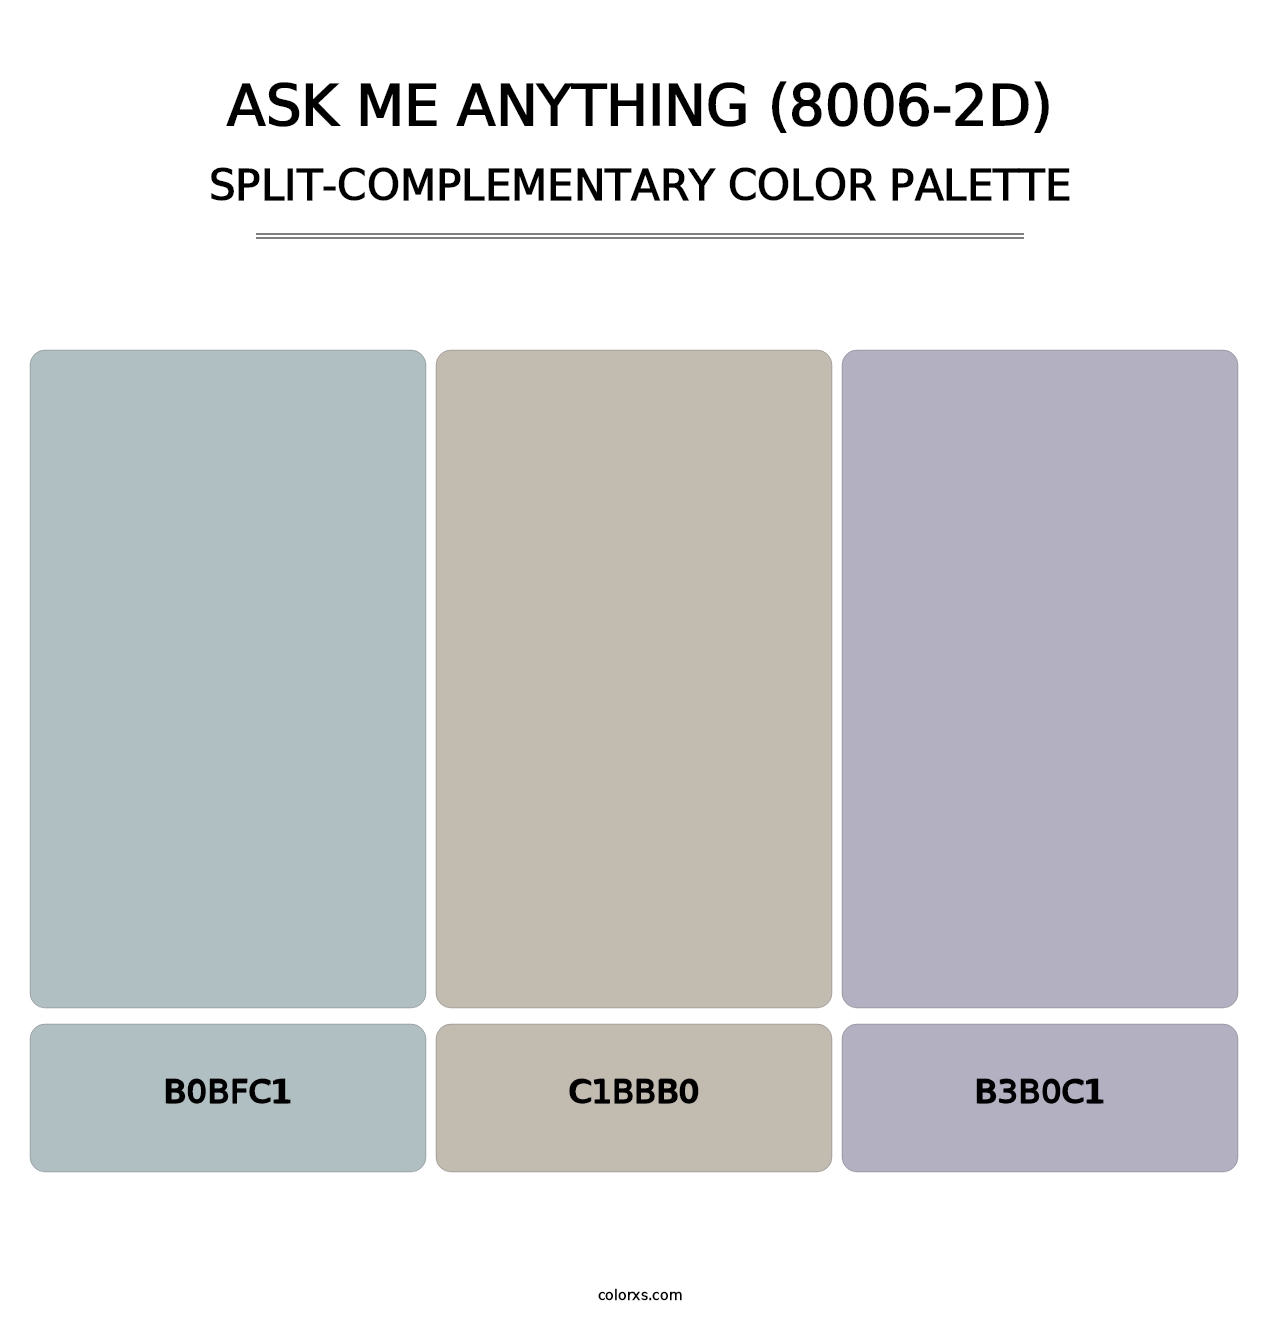 Ask Me Anything (8006-2D) - Split-Complementary Color Palette